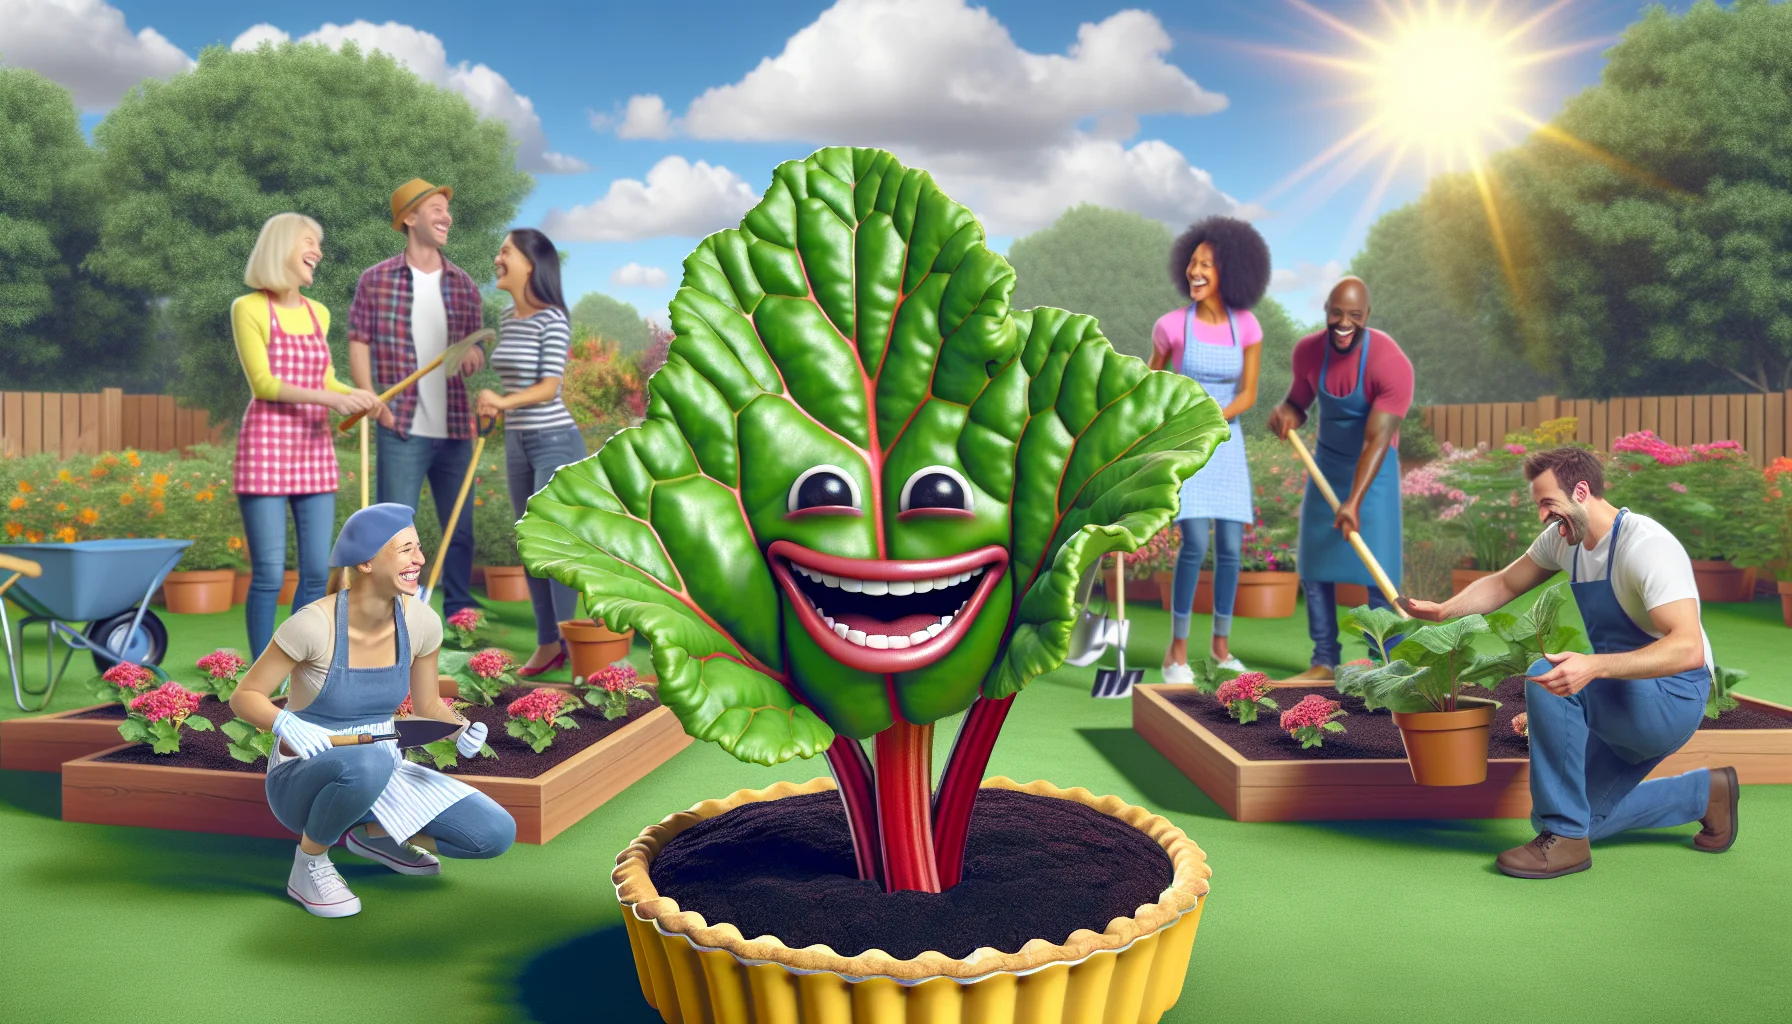 Generate a realistic image of a pie plant (rhubarb) in a whimsical scenario. The scene is taking place in a cheerful garden on a sunny day. A notable aspect is that this pie plant has a grin on its leaves as if it's inviting people to enjoy gardening. In the background, there are individuals of diverse descents such as Caucasian, Hispanic, and Black both females and males, laughing and having fun while tending to their plants. The image promotes a joyful and community-driven spirit of gardening.